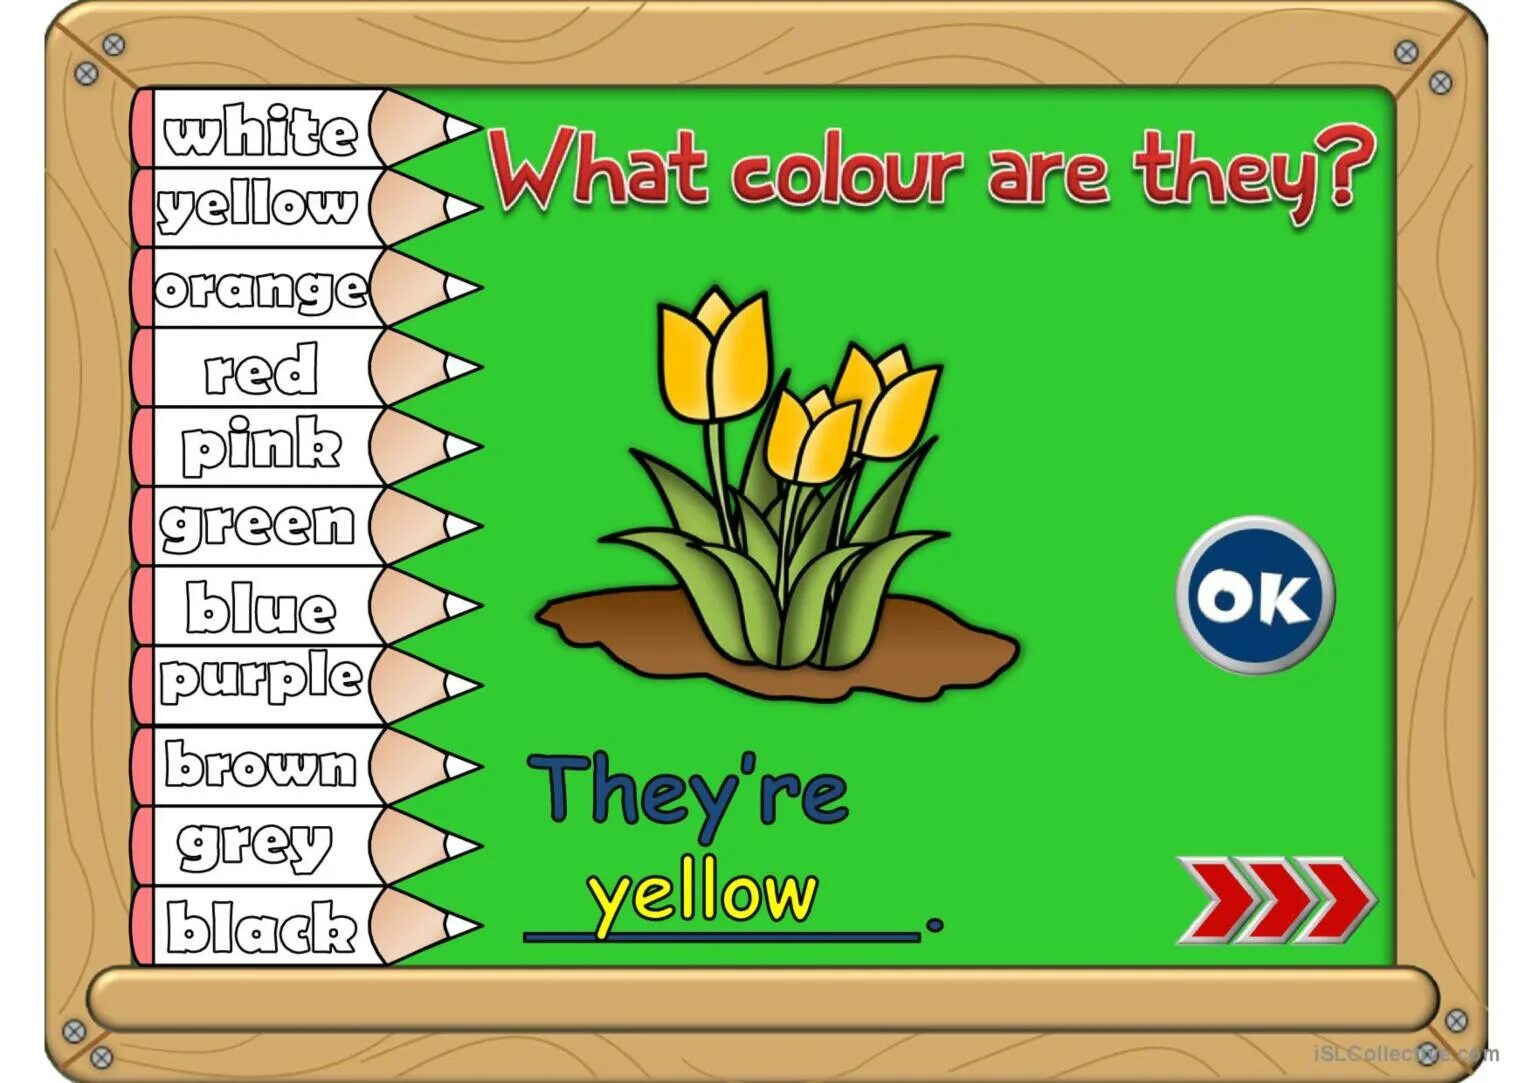 Игра what Color. What Colour is it презентация. Игра "цвета". What Colour are they. What colour is this